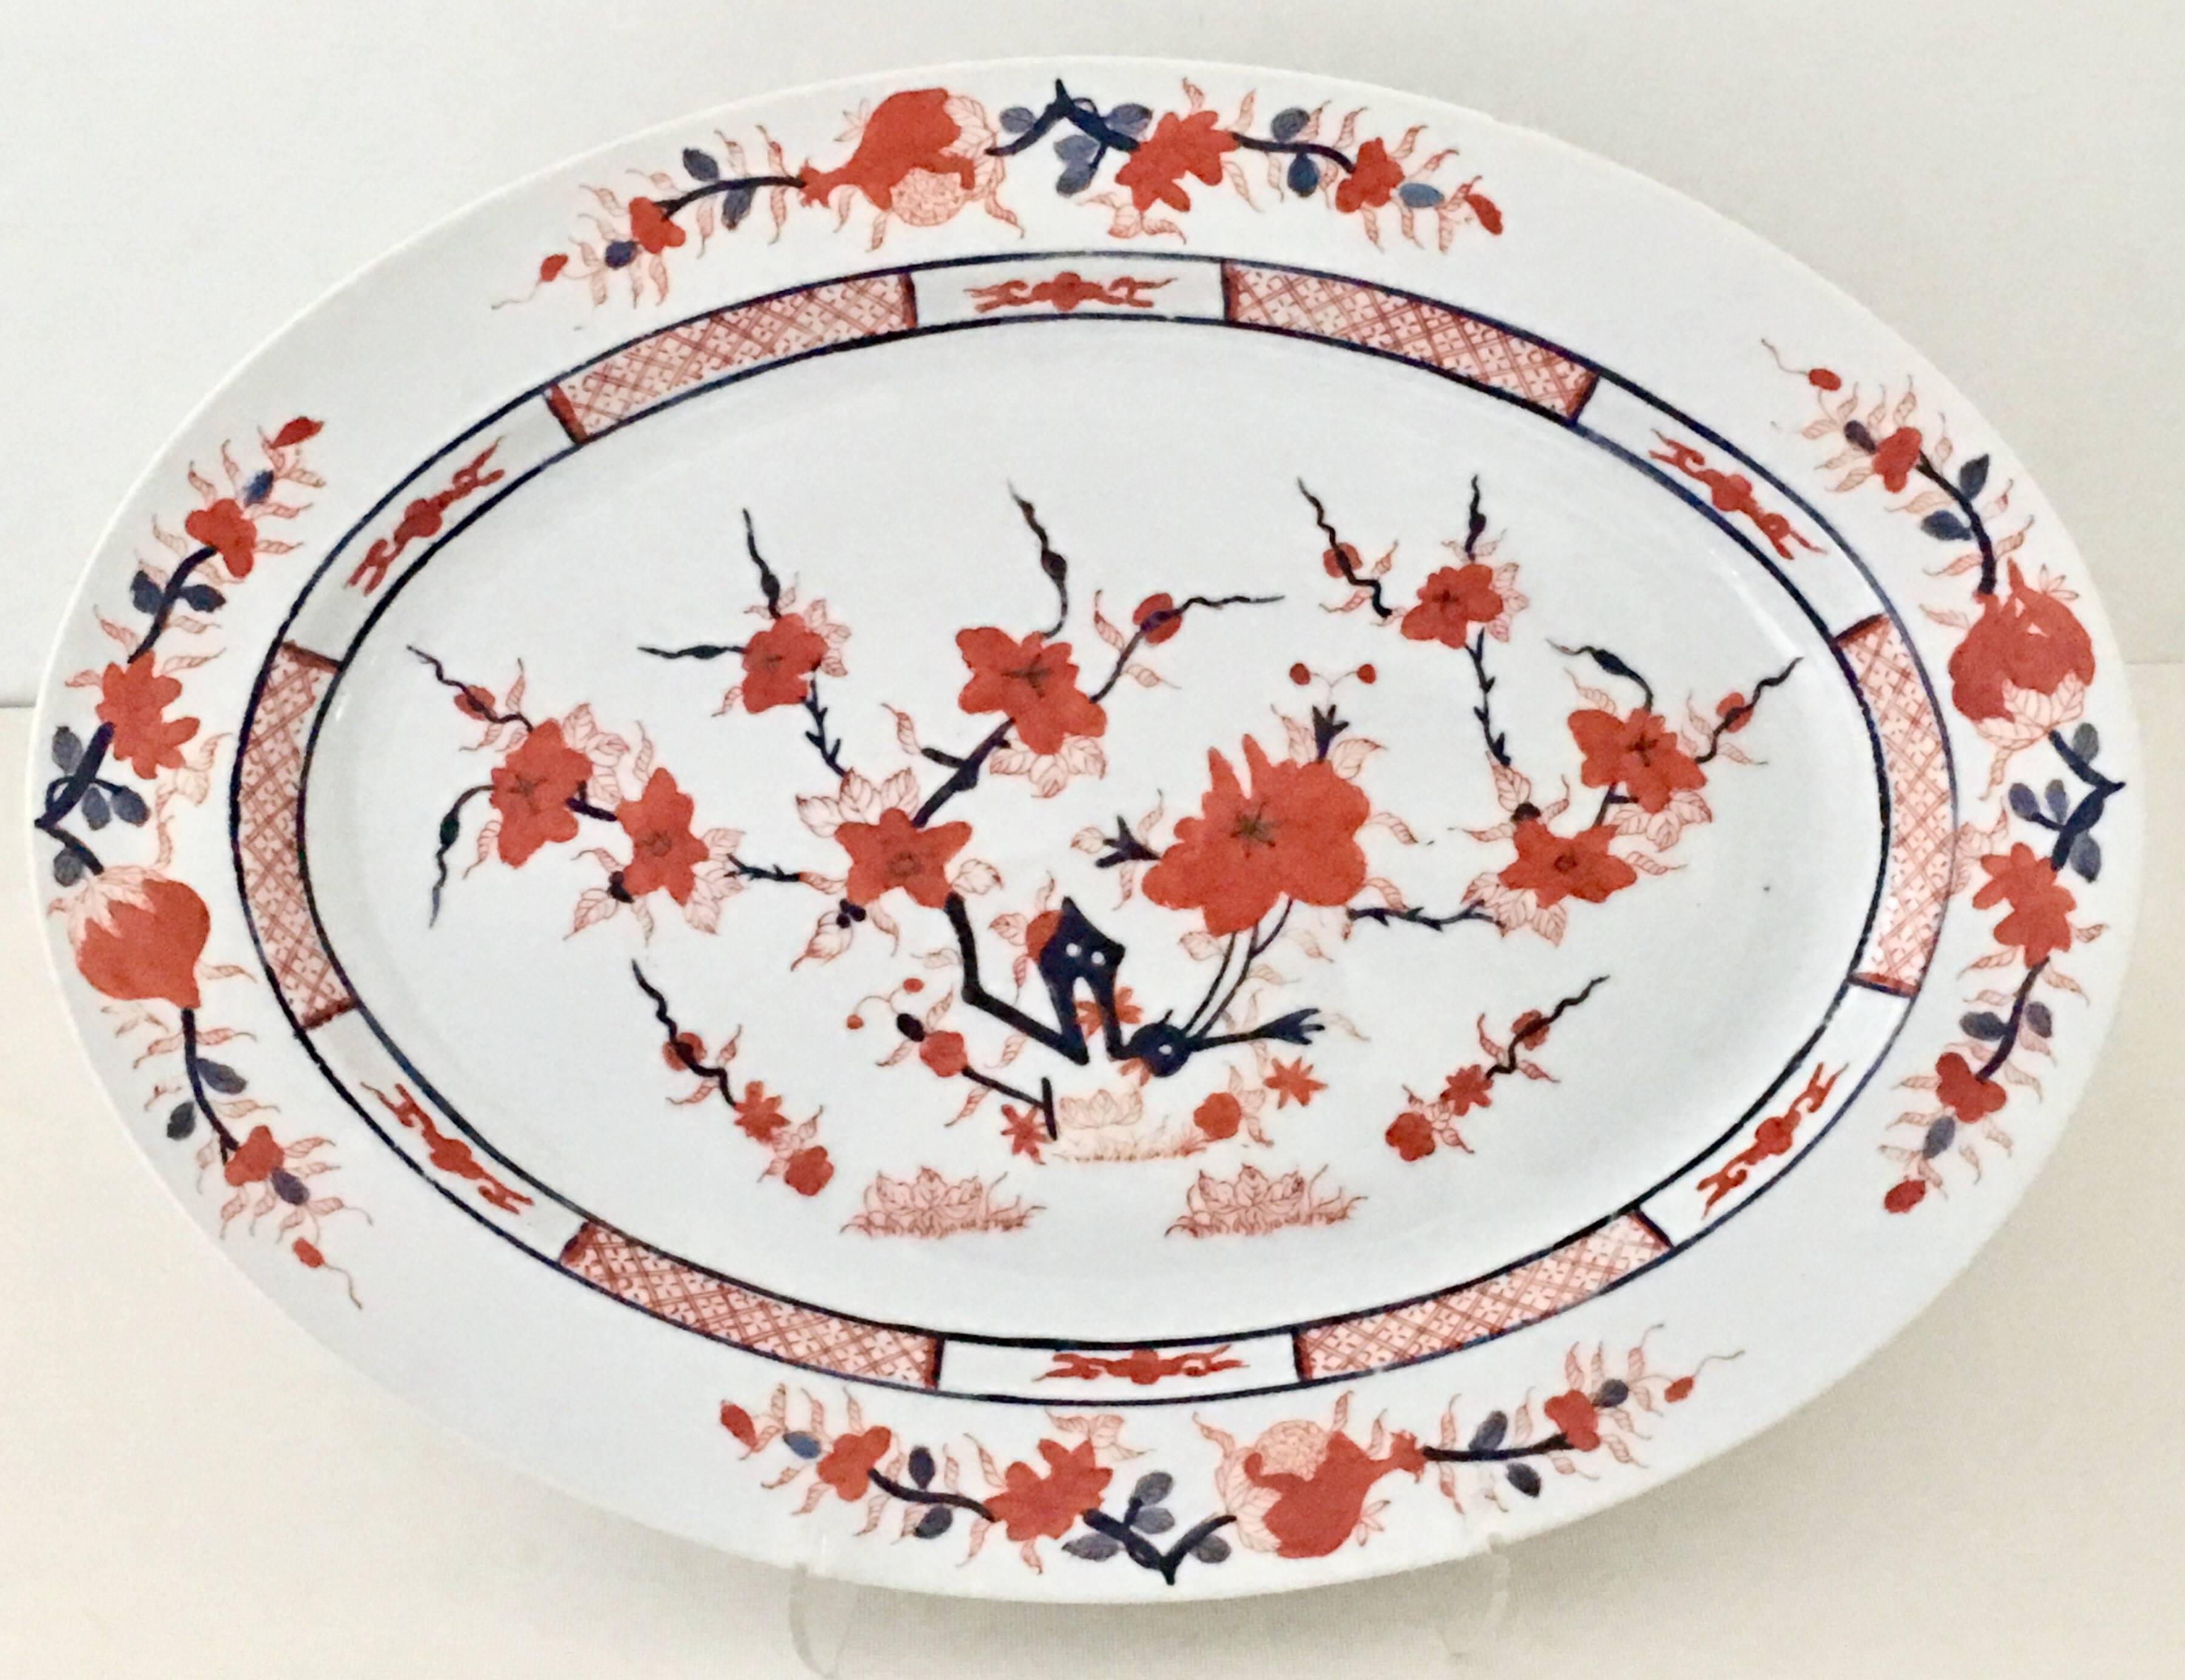 20th Century Japanese Imari porcelain decorated in Hong Kong set of two serving pieces.
Features a hand-painted white ground with 22-karat gold hand-painted and enameled ink blue and red to orange hues. Each piece is marked on the underside,